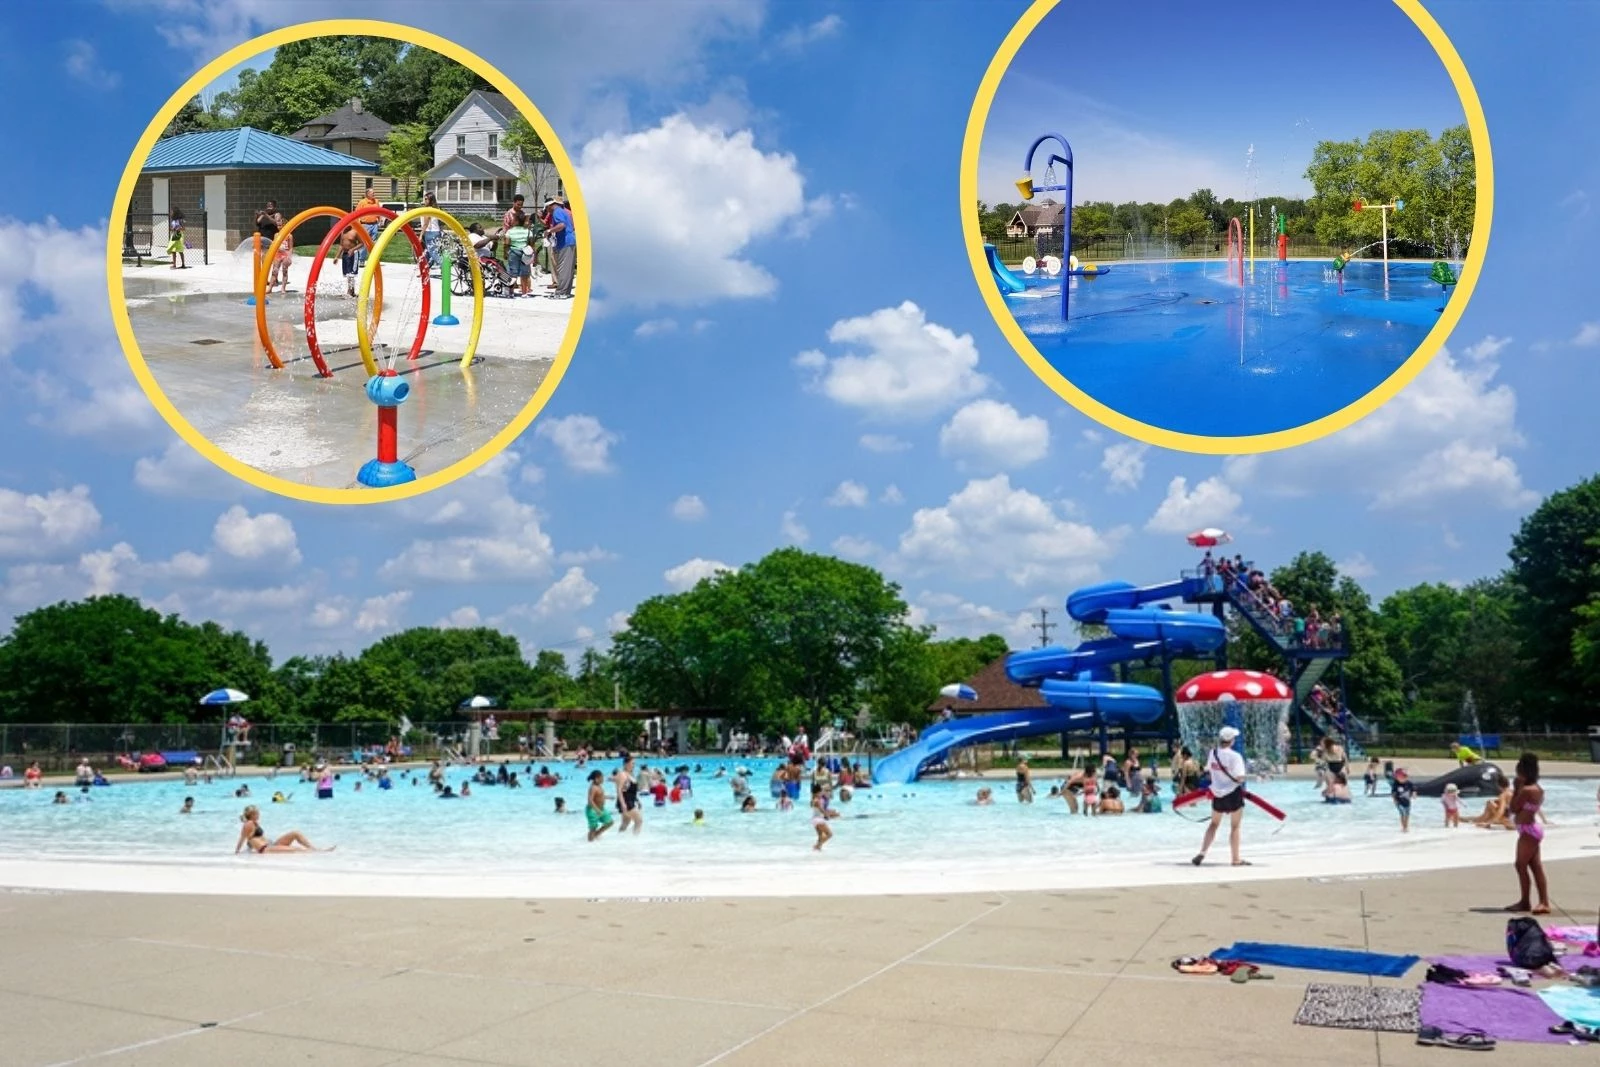 City of Grand Rapids Parks and Recreation/ Facebook